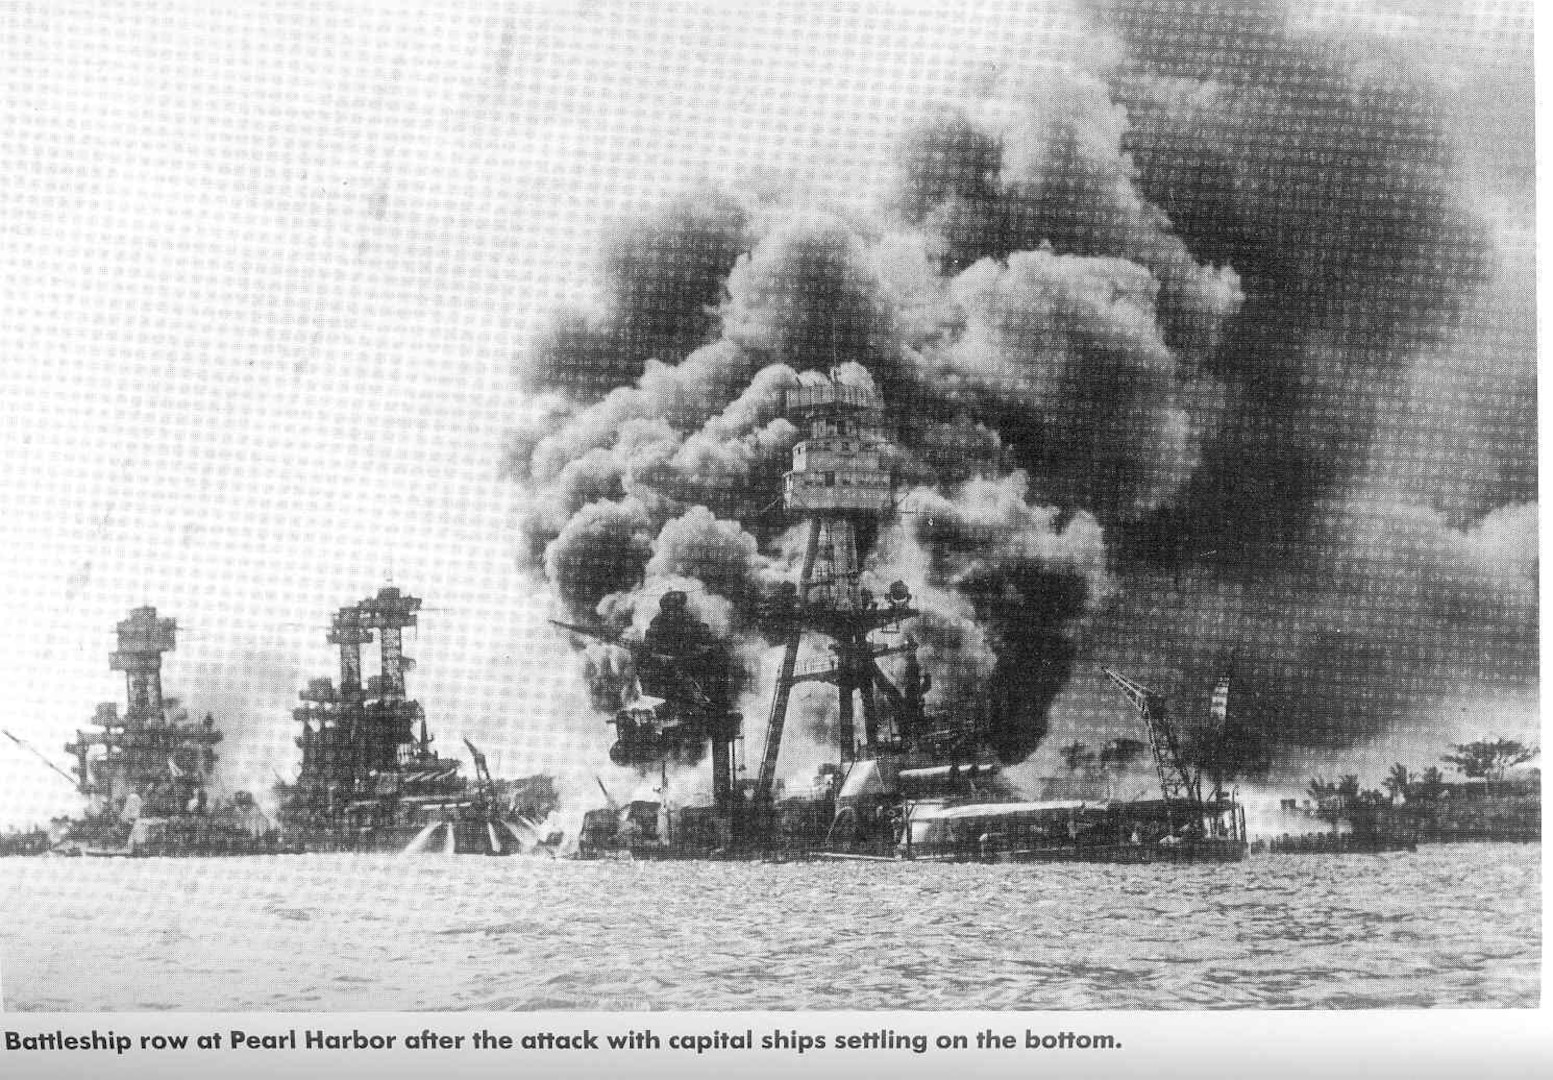 Battleship row at Pearl Harbor after the attack with capital ships settling on the bottom.